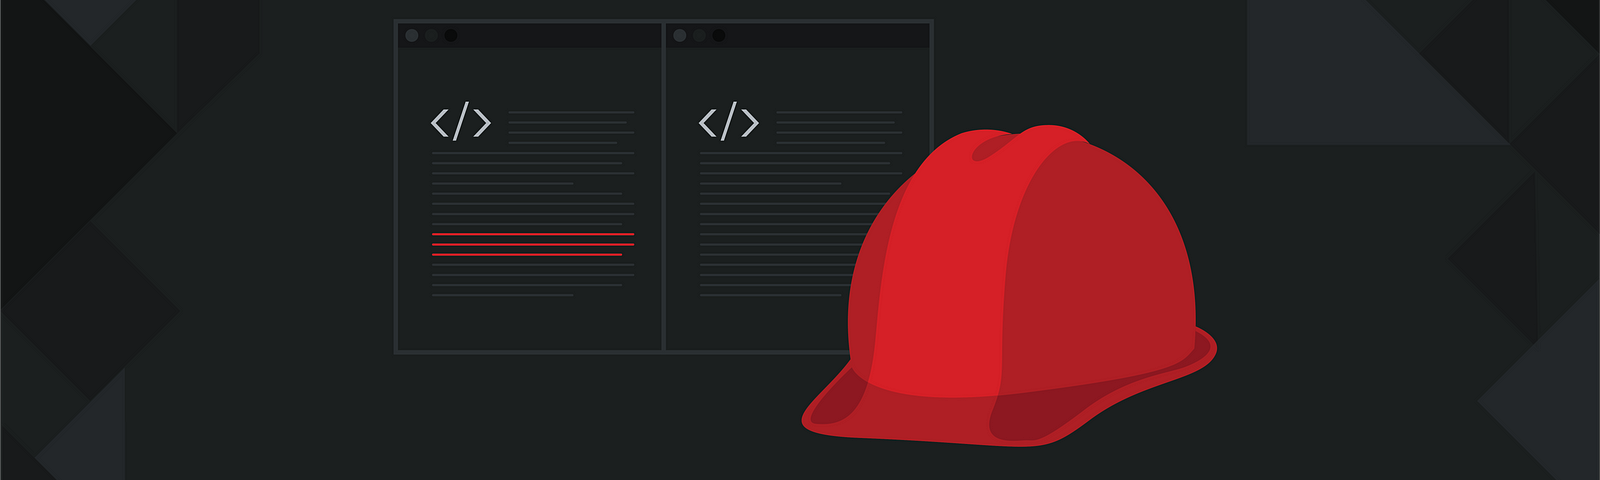 Image: Depiction of software and a hard hat